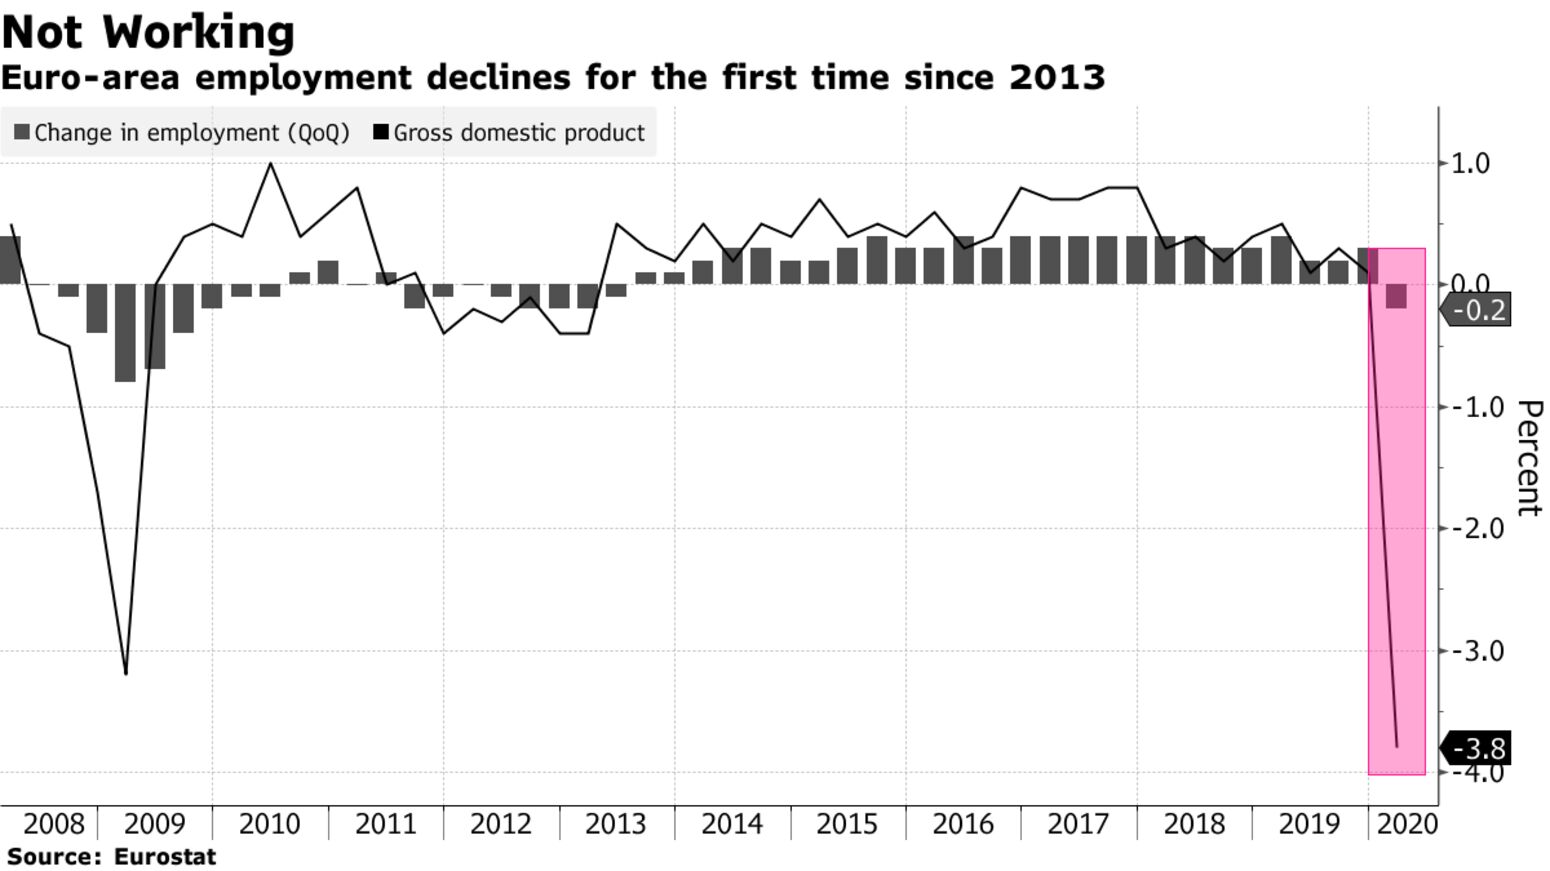 Euro-area employment declines for the first time since 2013